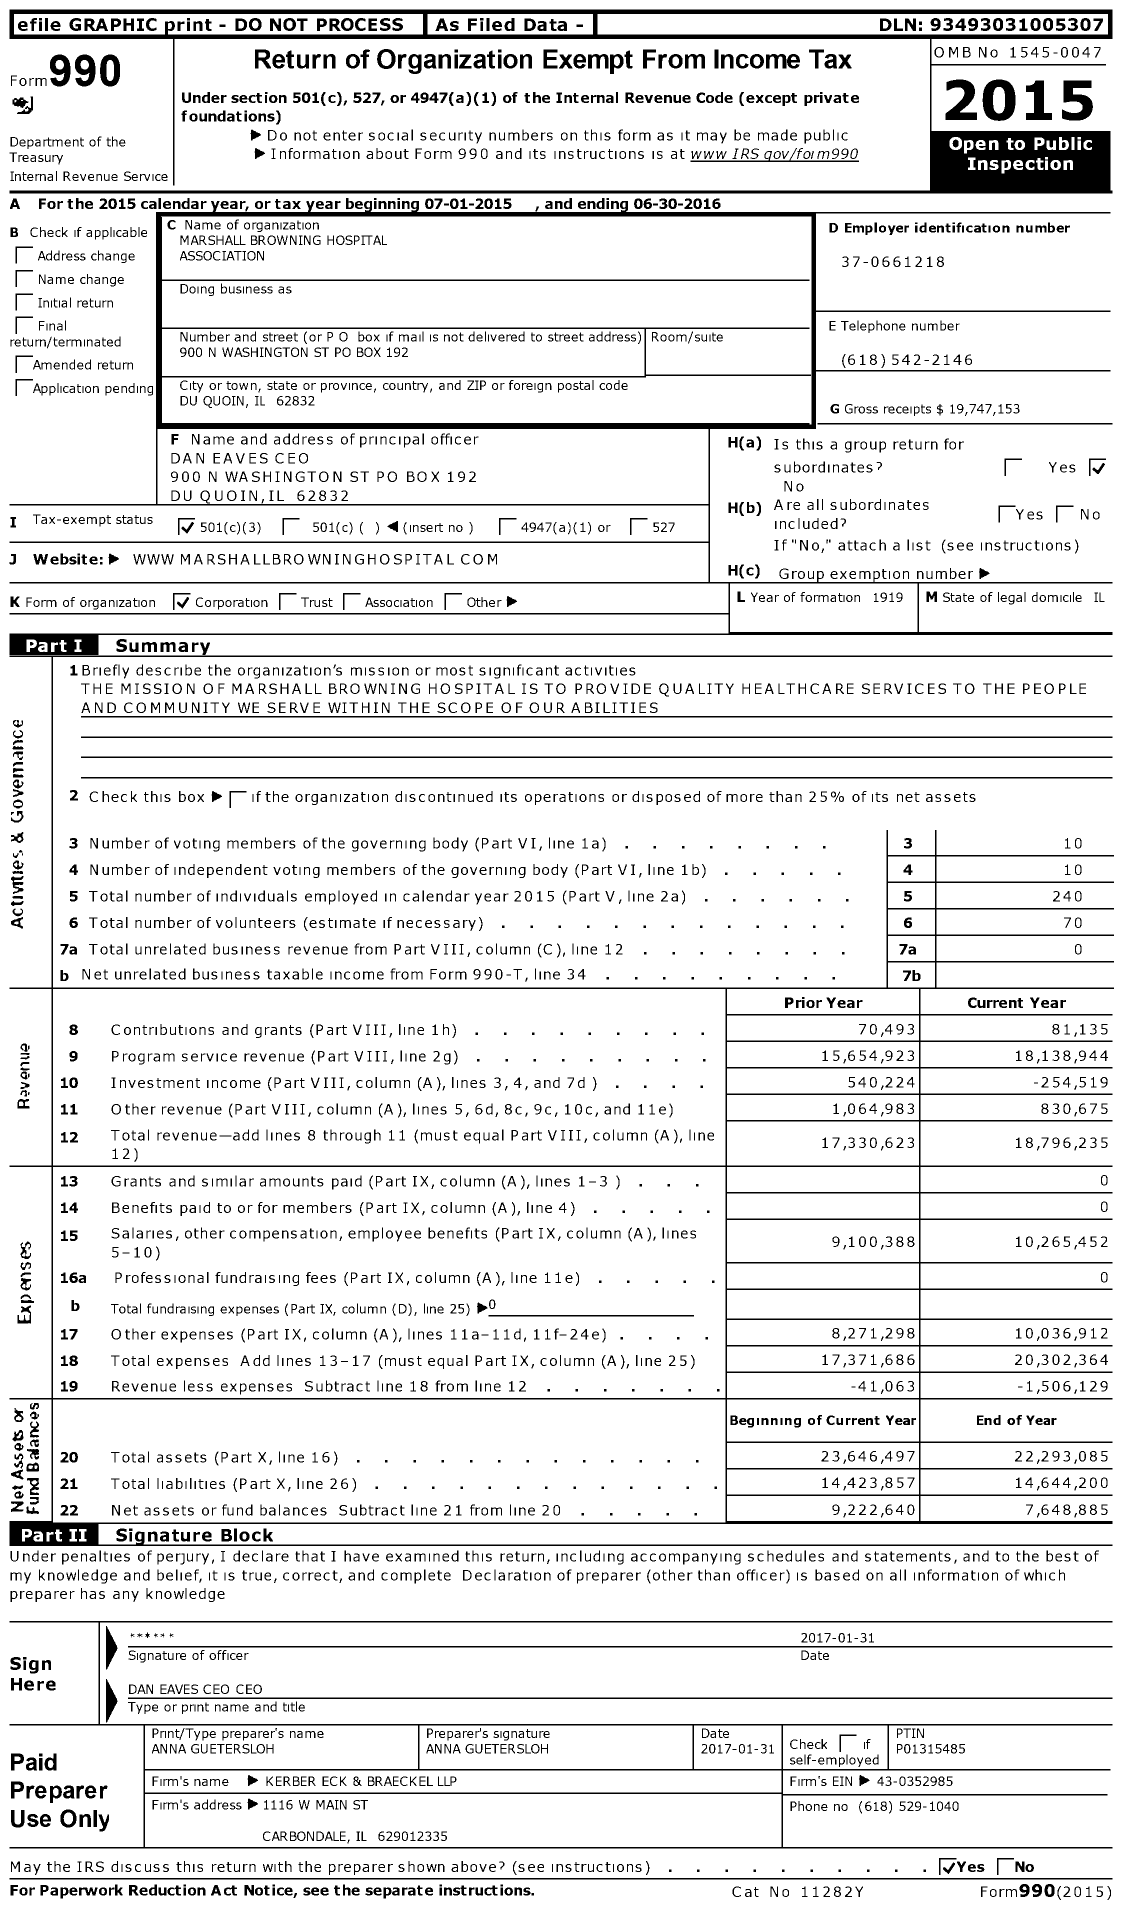 Image of first page of 2015 Form 990 for Marshall Browning Hospital (MBH)